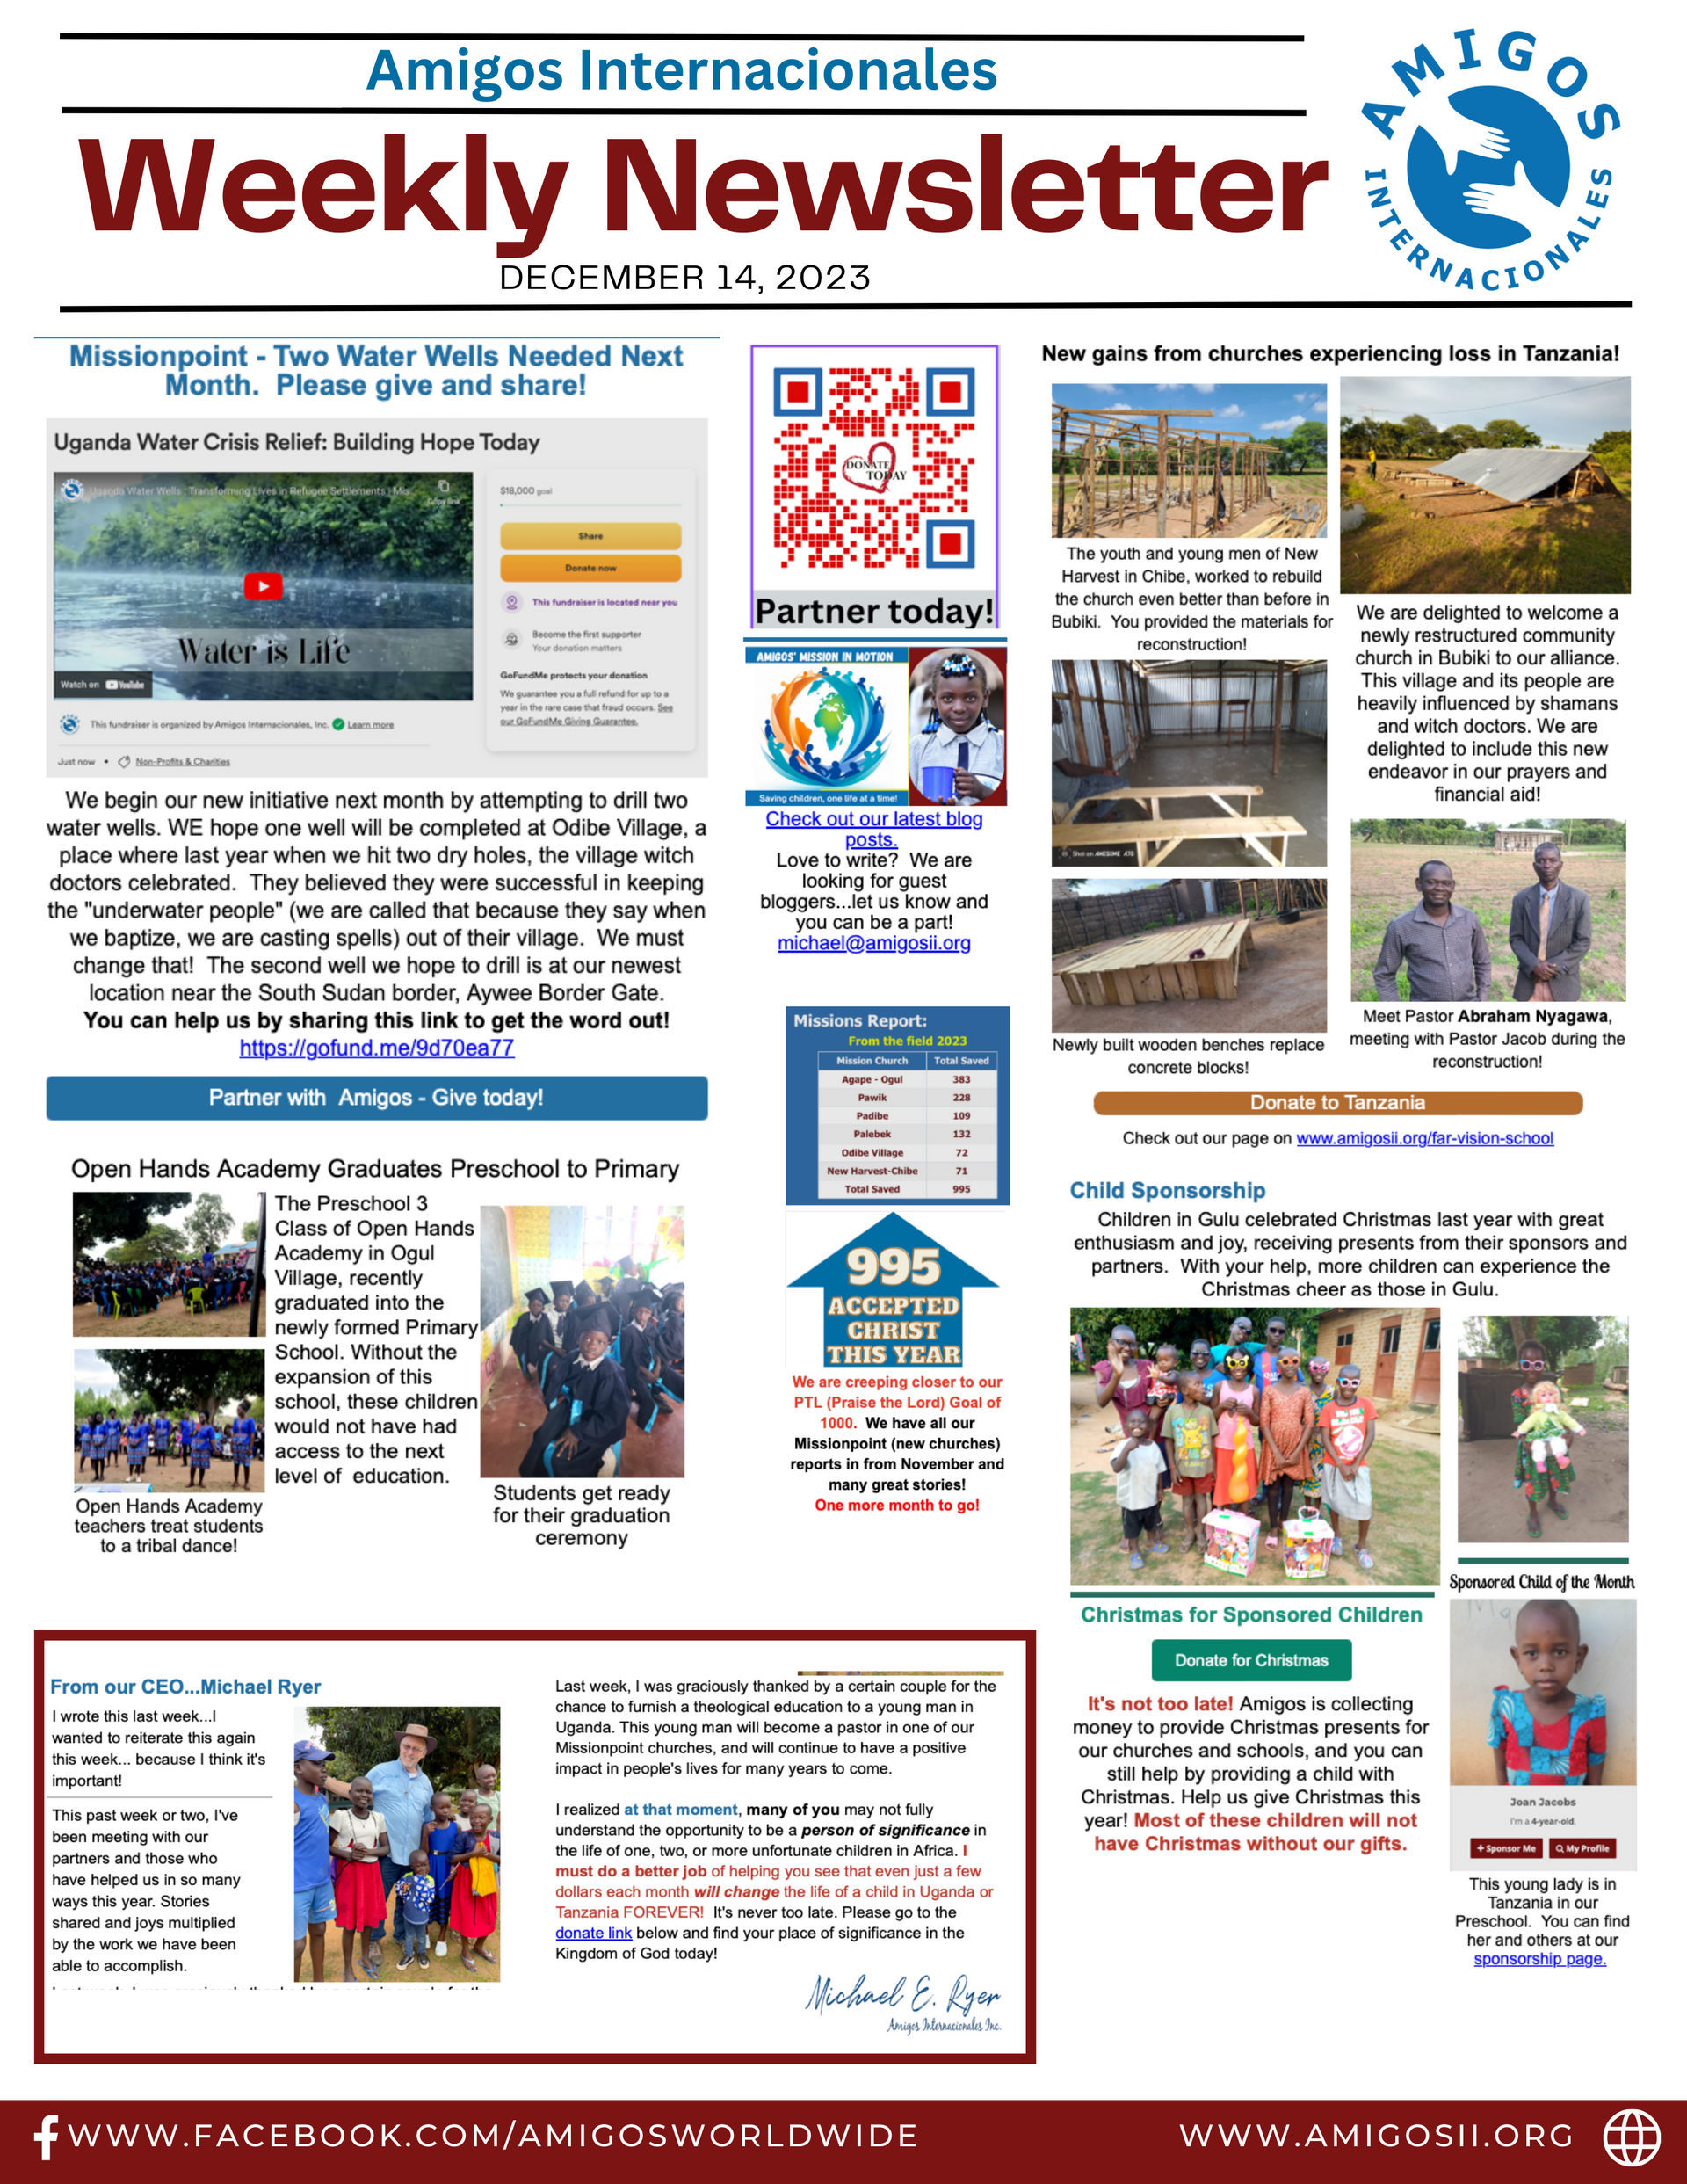 a weekly newsletter from amigos internacionales is dated december 14th